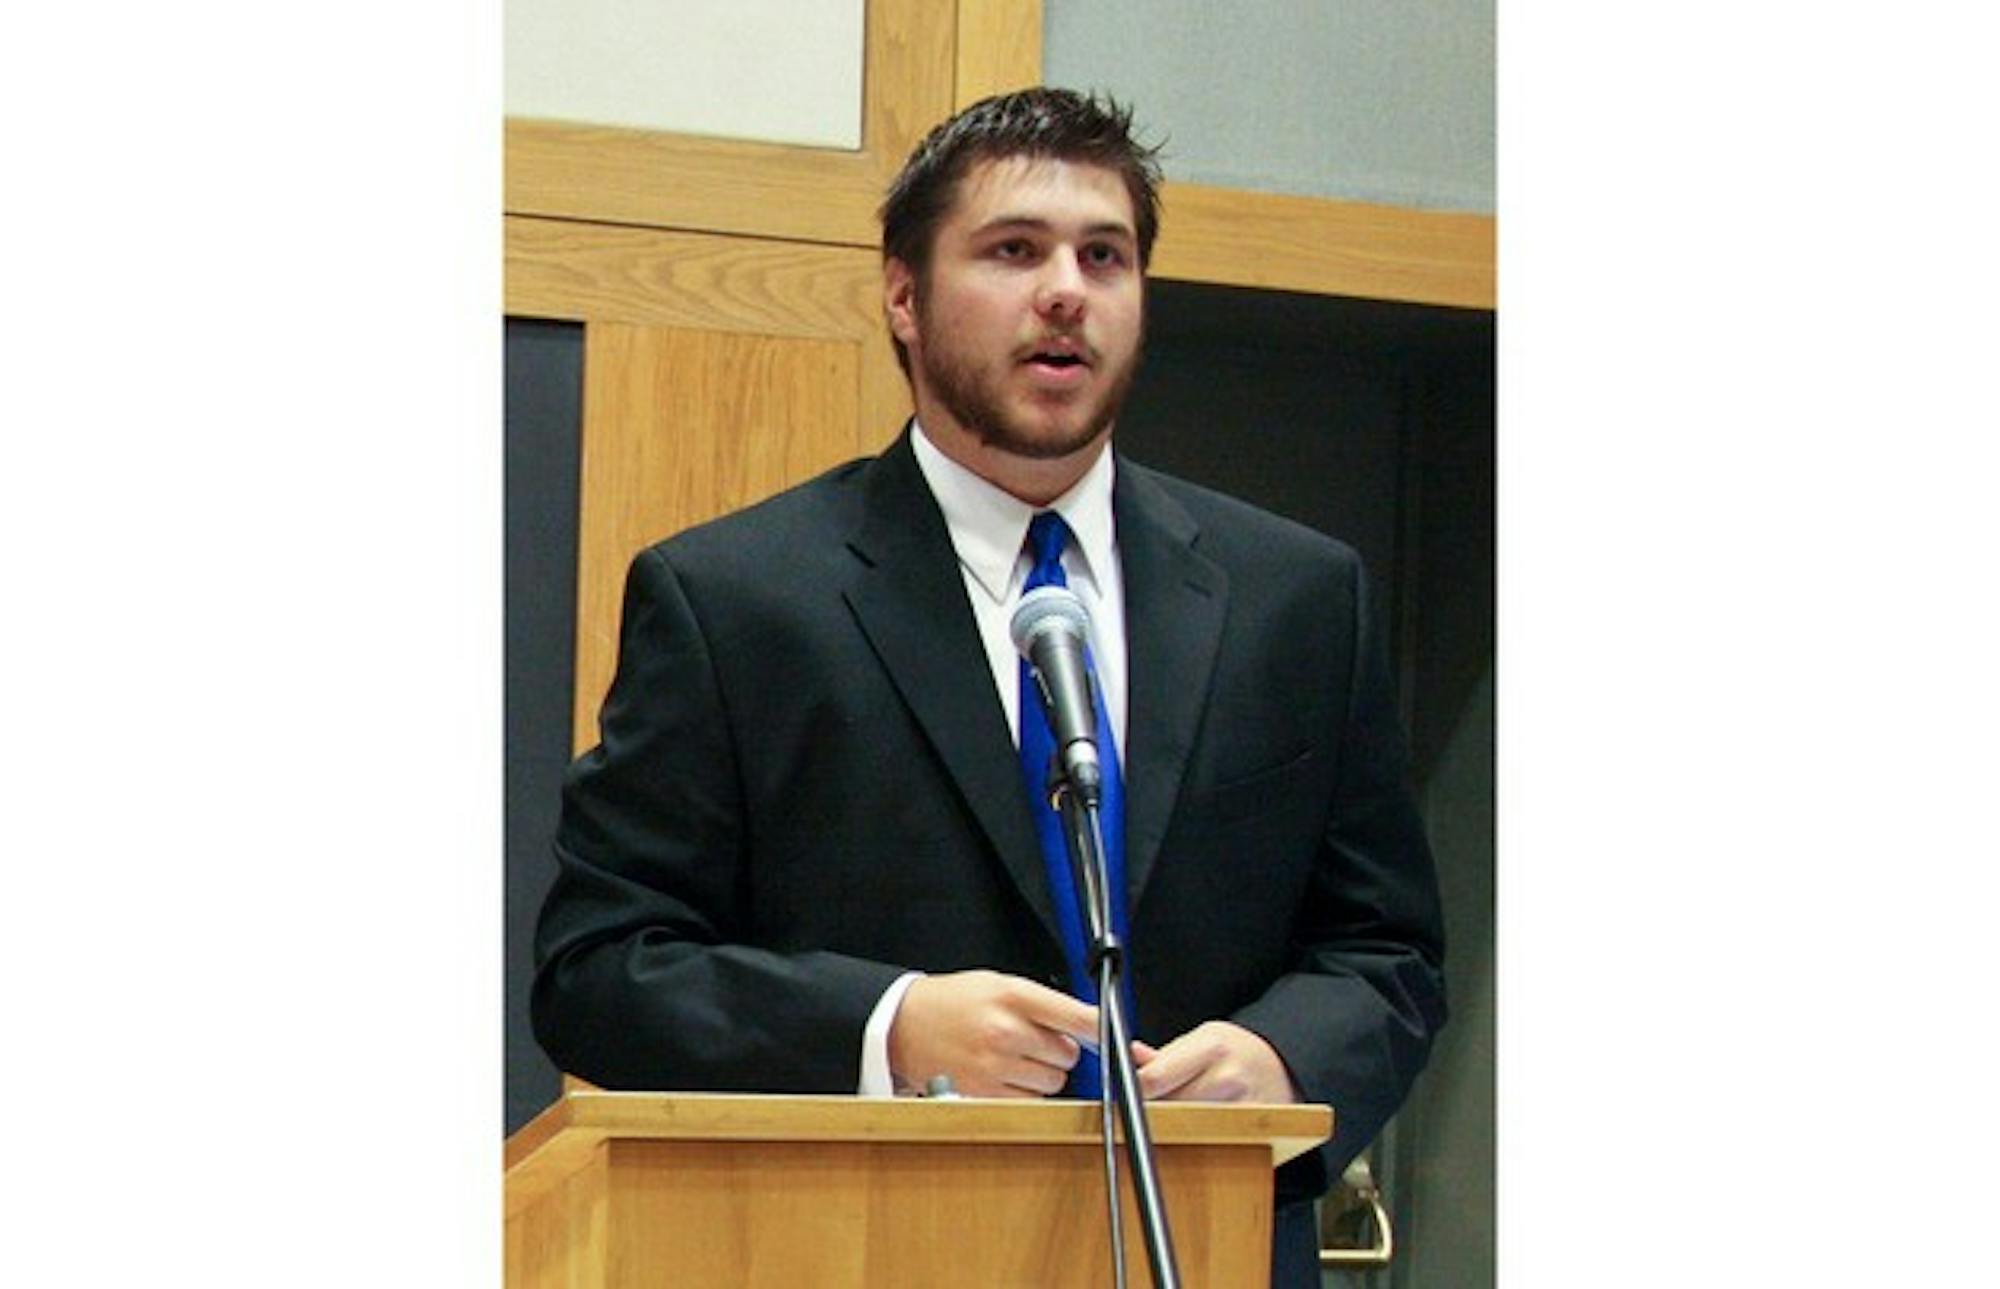 Tay Stevenson '10 received his party's endorsement in the Minnesota District 12 state Senate race.